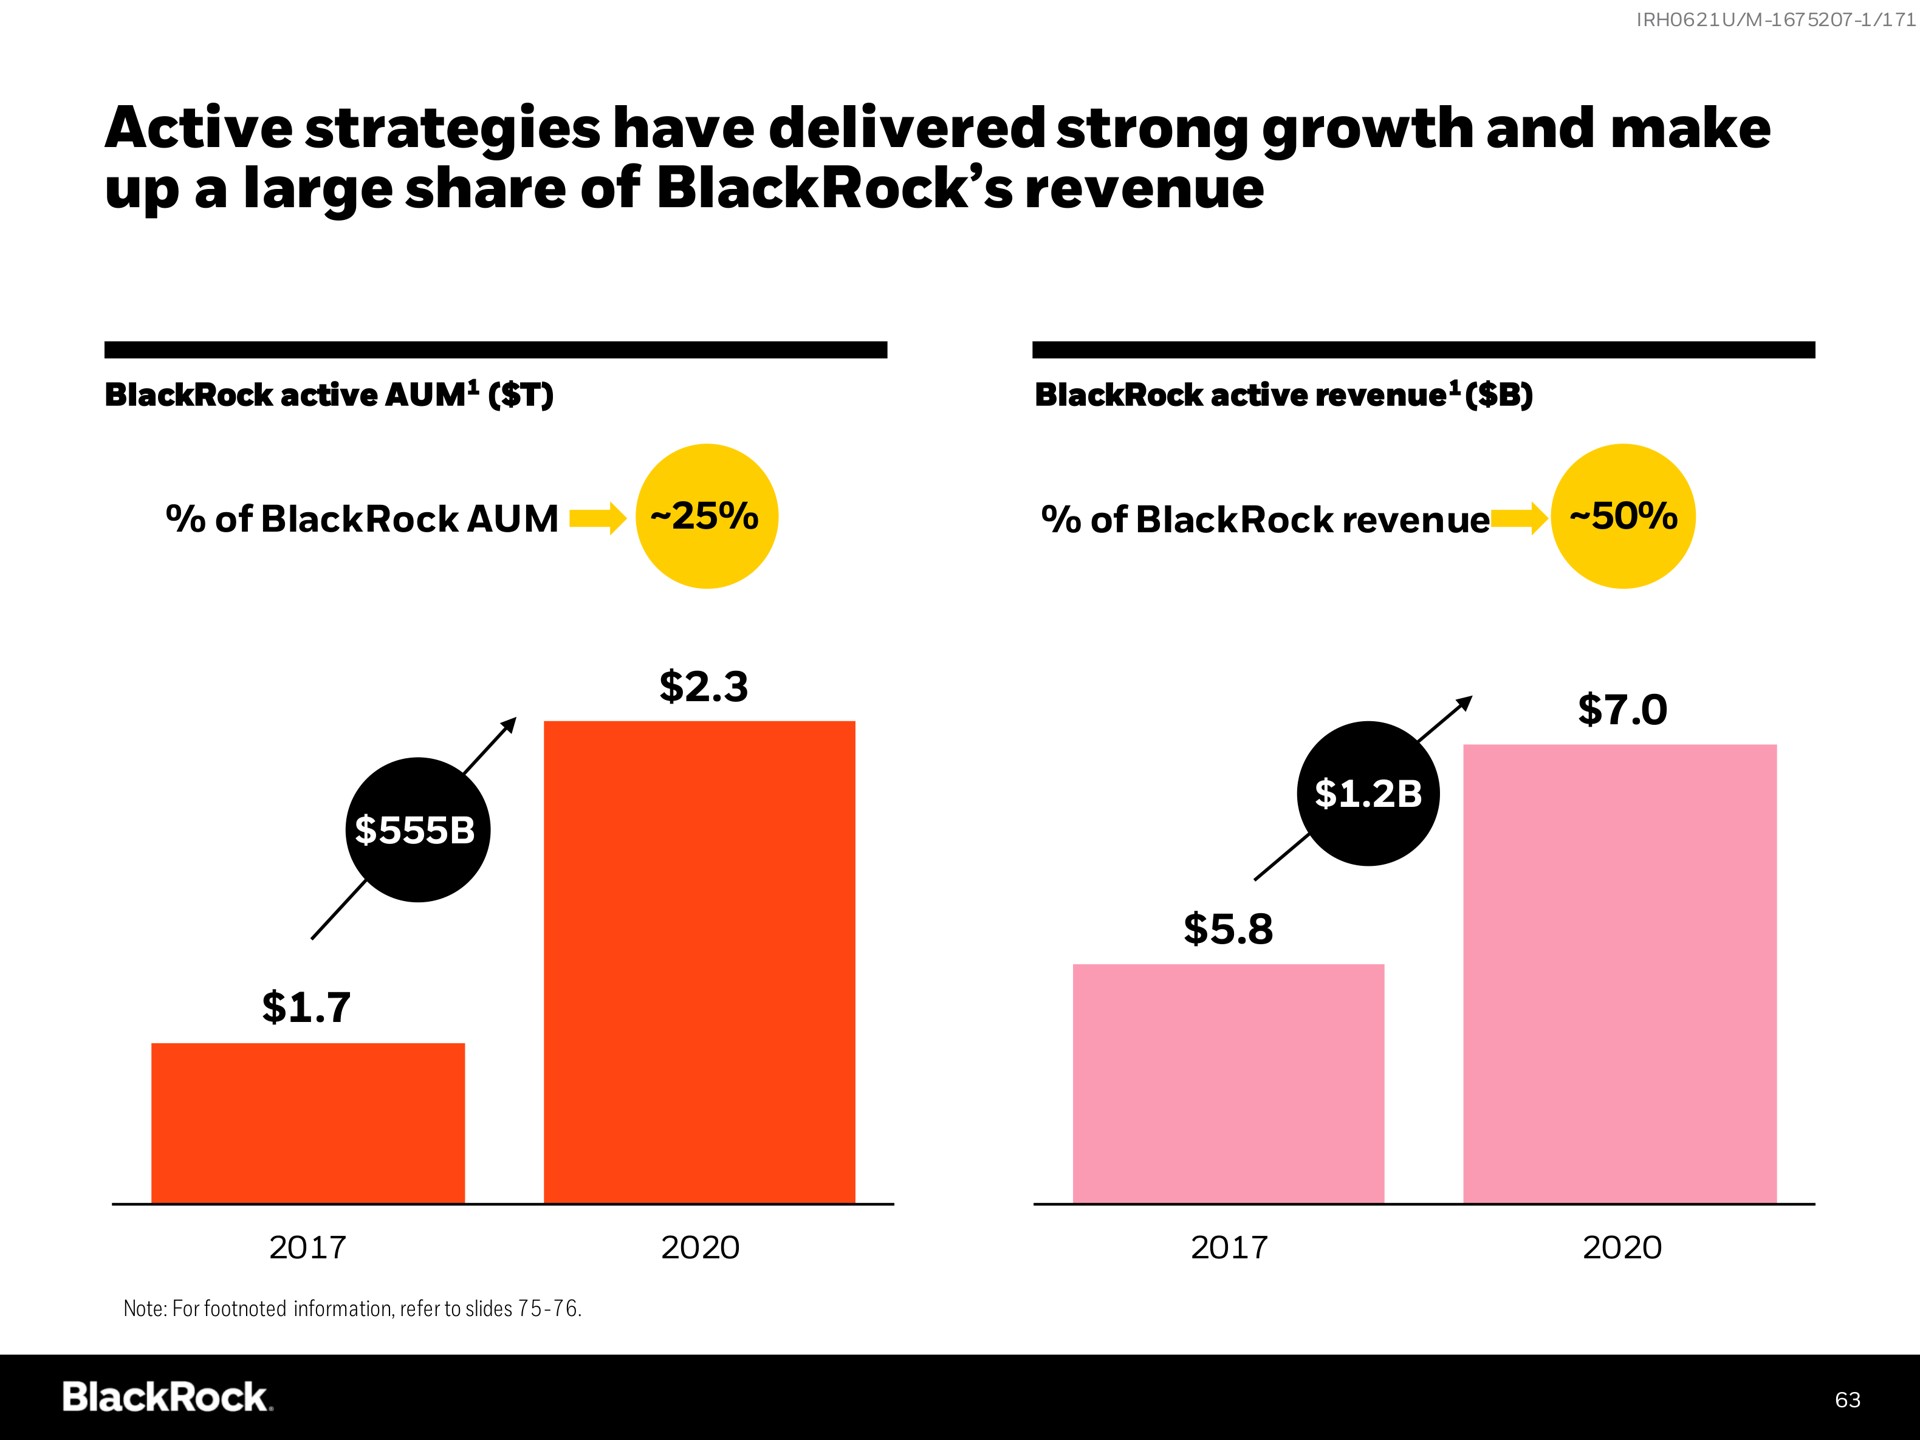 active strategies have delivered strong growth and make up a large share of revenue | BlackRock